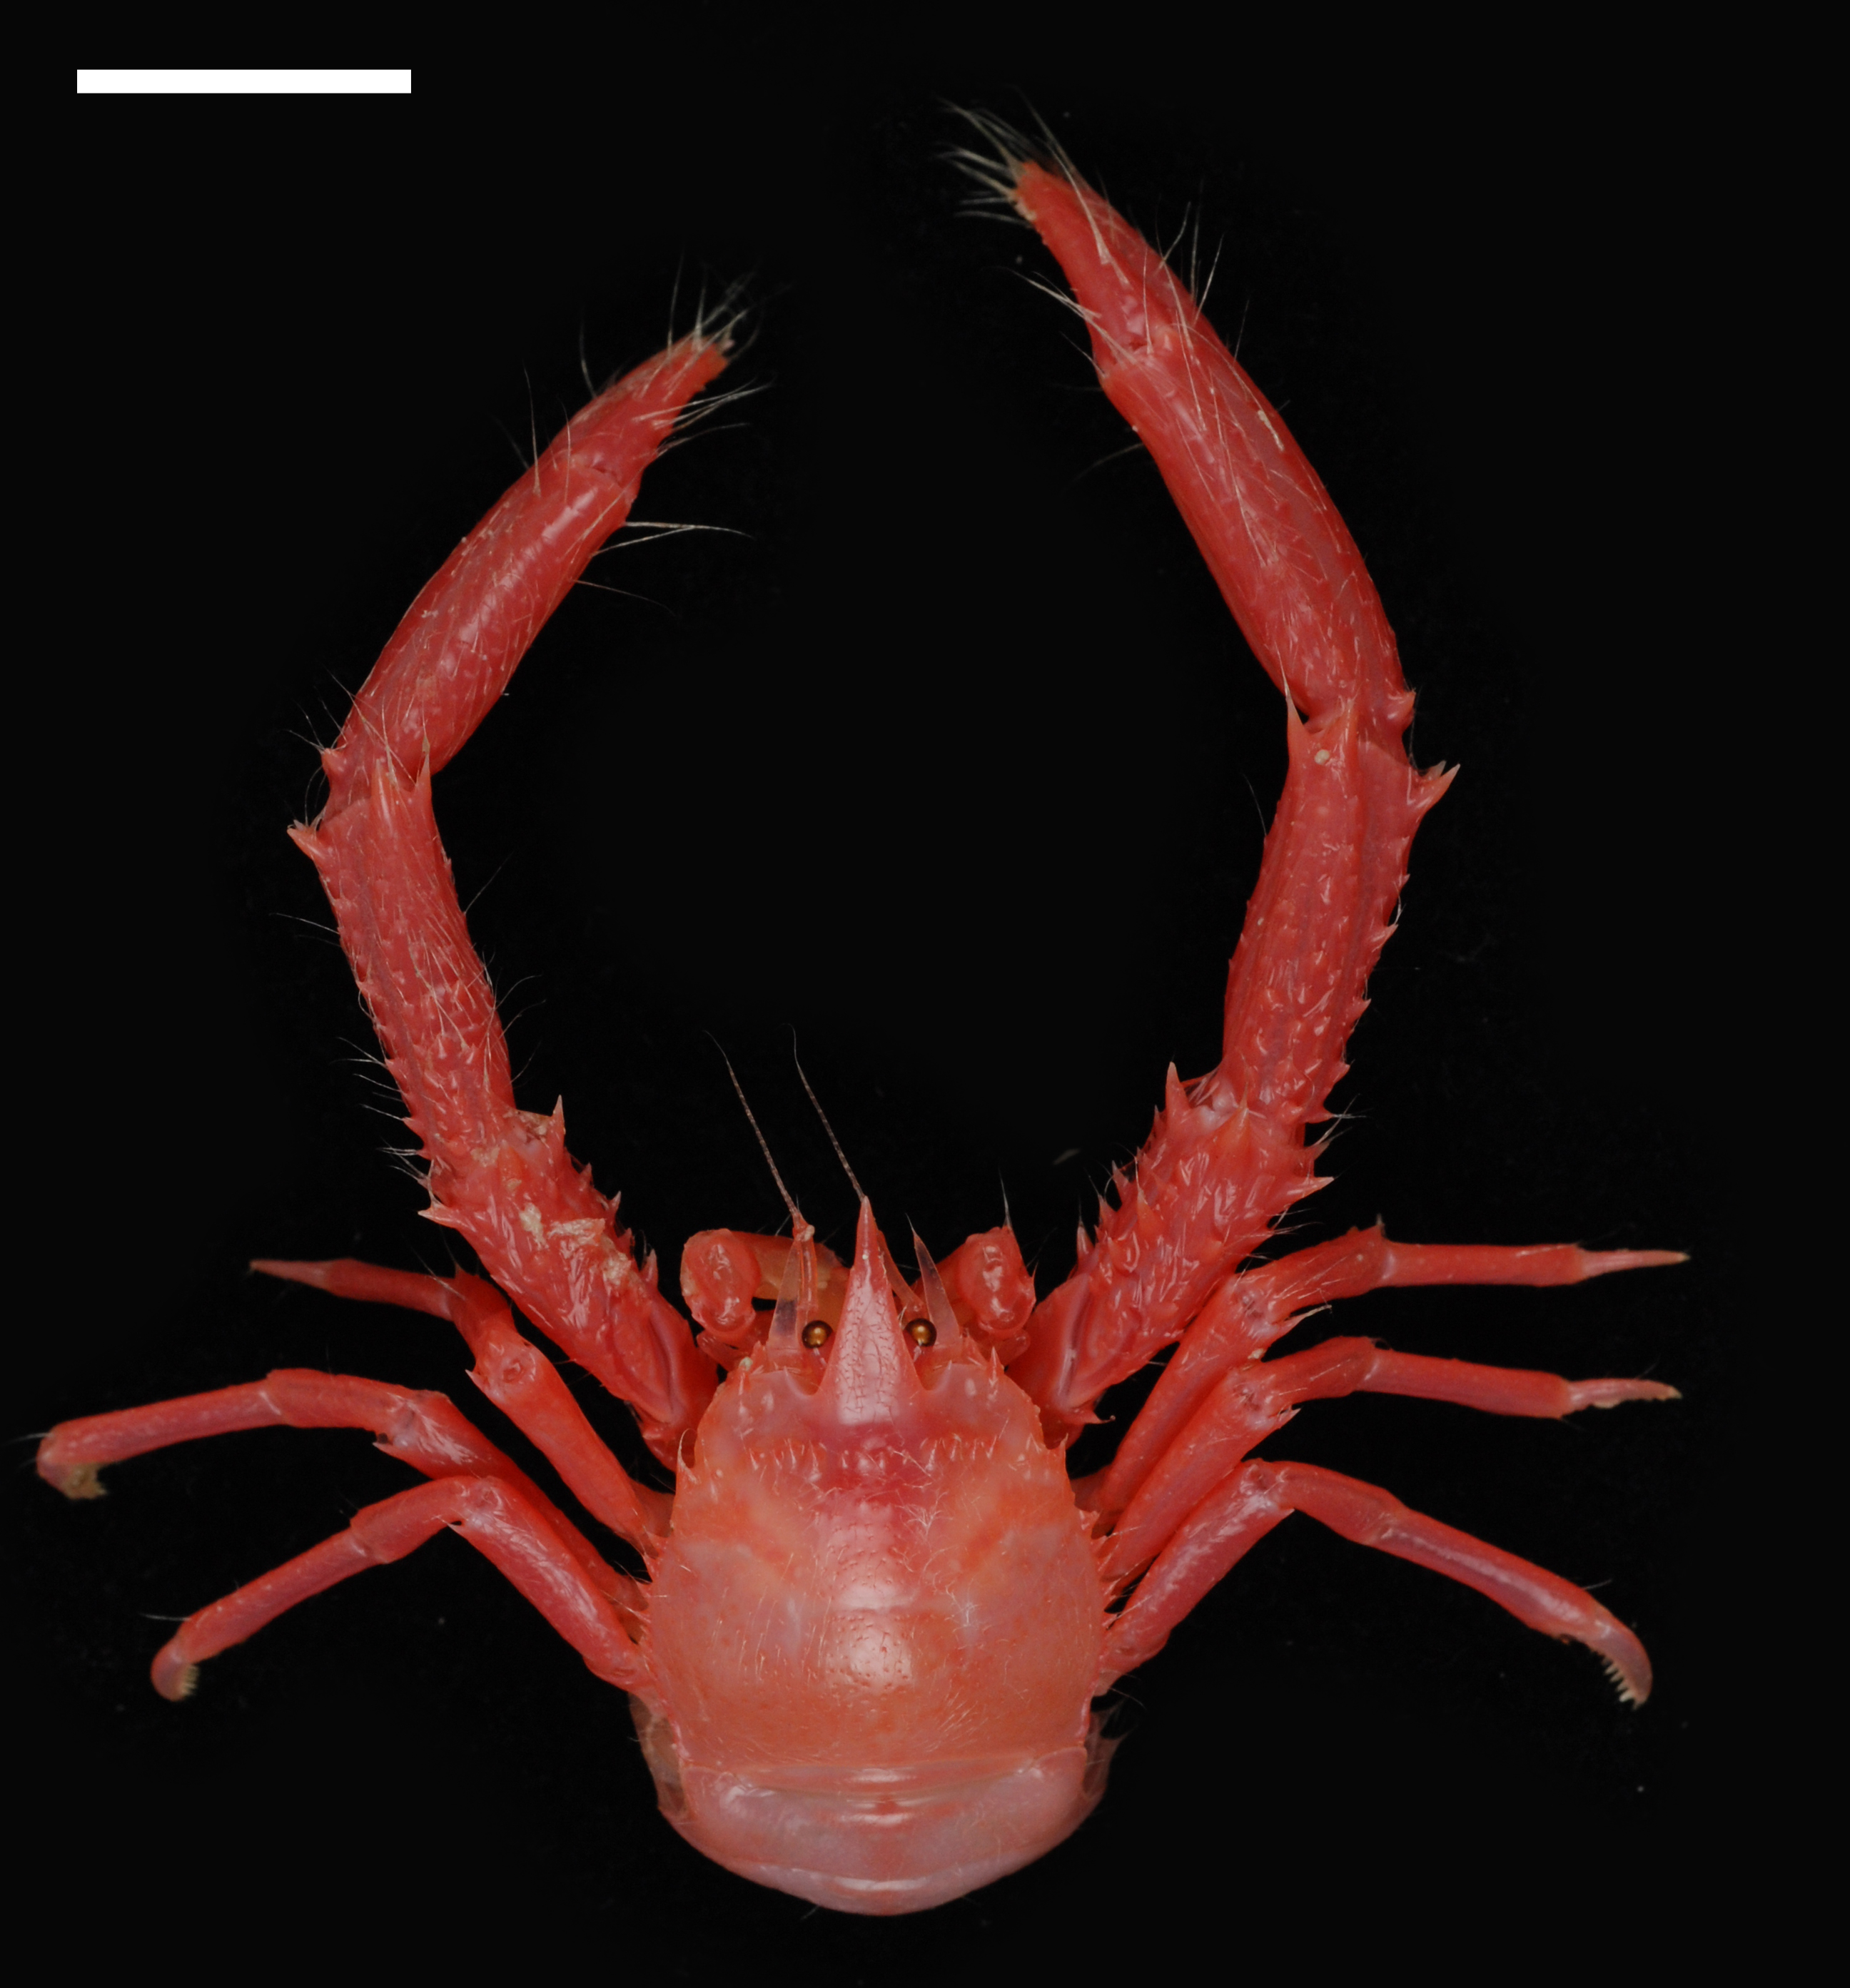 A red crustacean that looks like a cross between a lobster and a crab